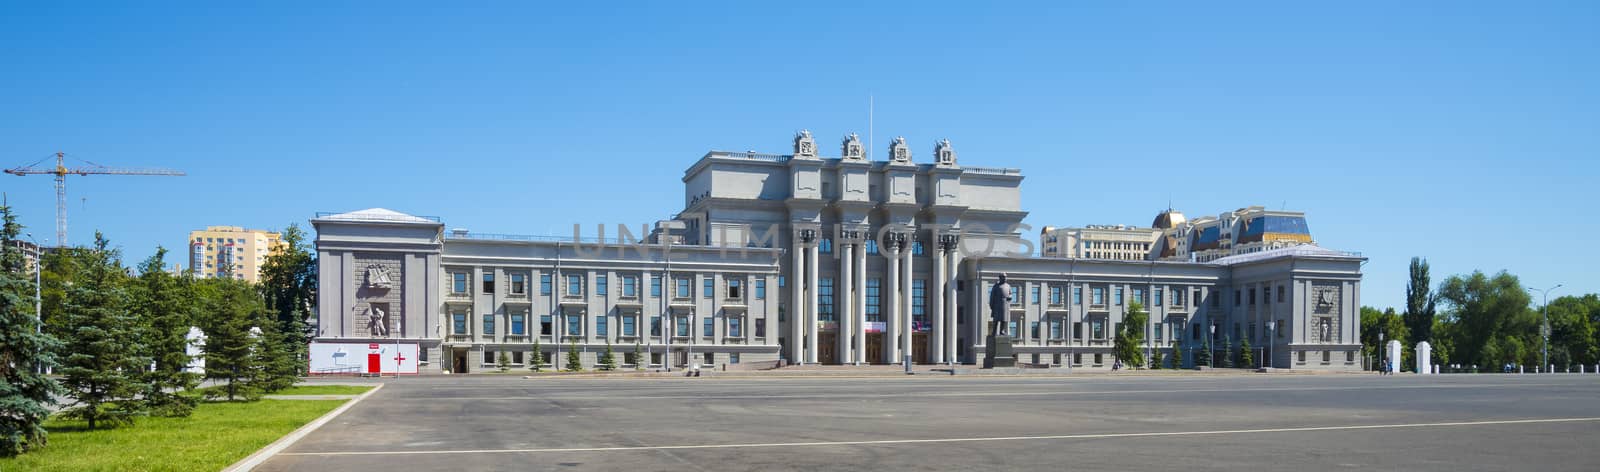 Opera and ballet building on Kuibyshev square in Samara, Russia by butenkow